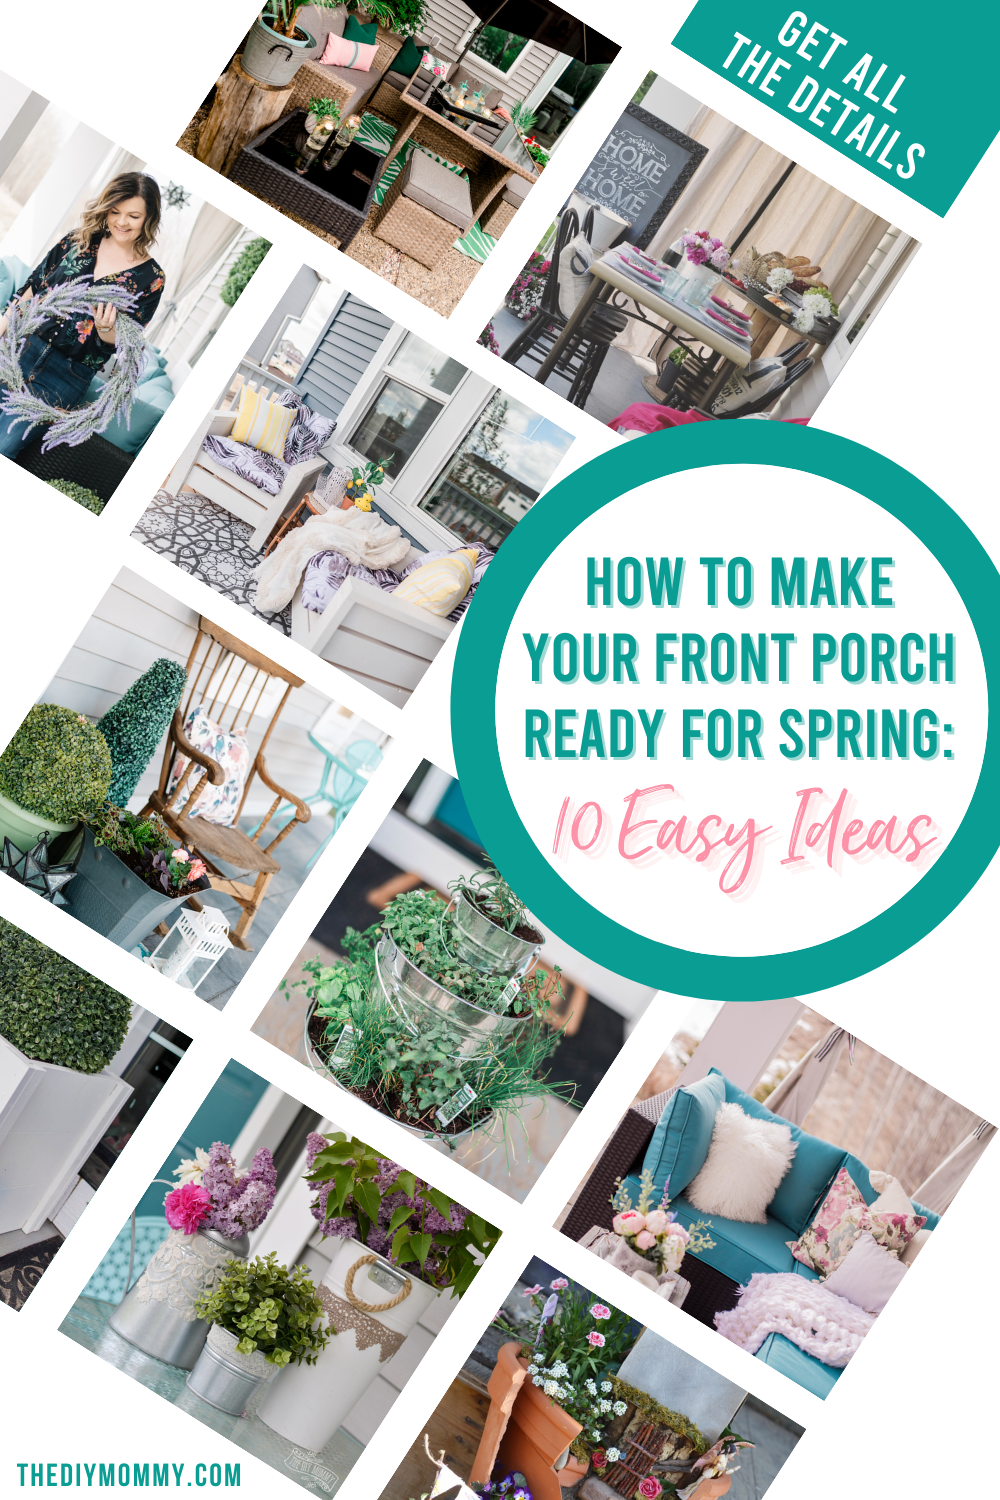 10 easy ideas for decorating your front porch for spring